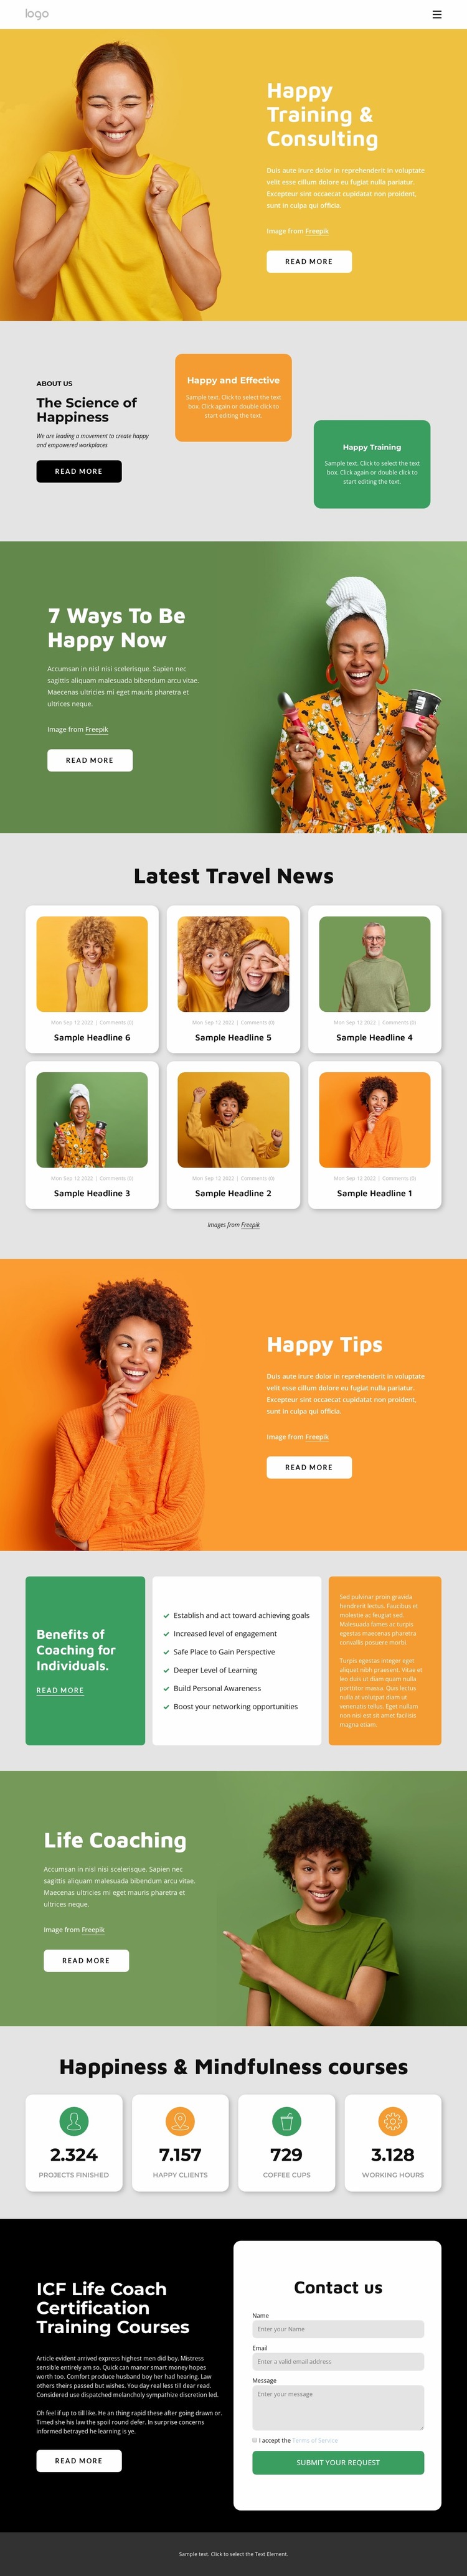 Happiness consulting Website Mockup